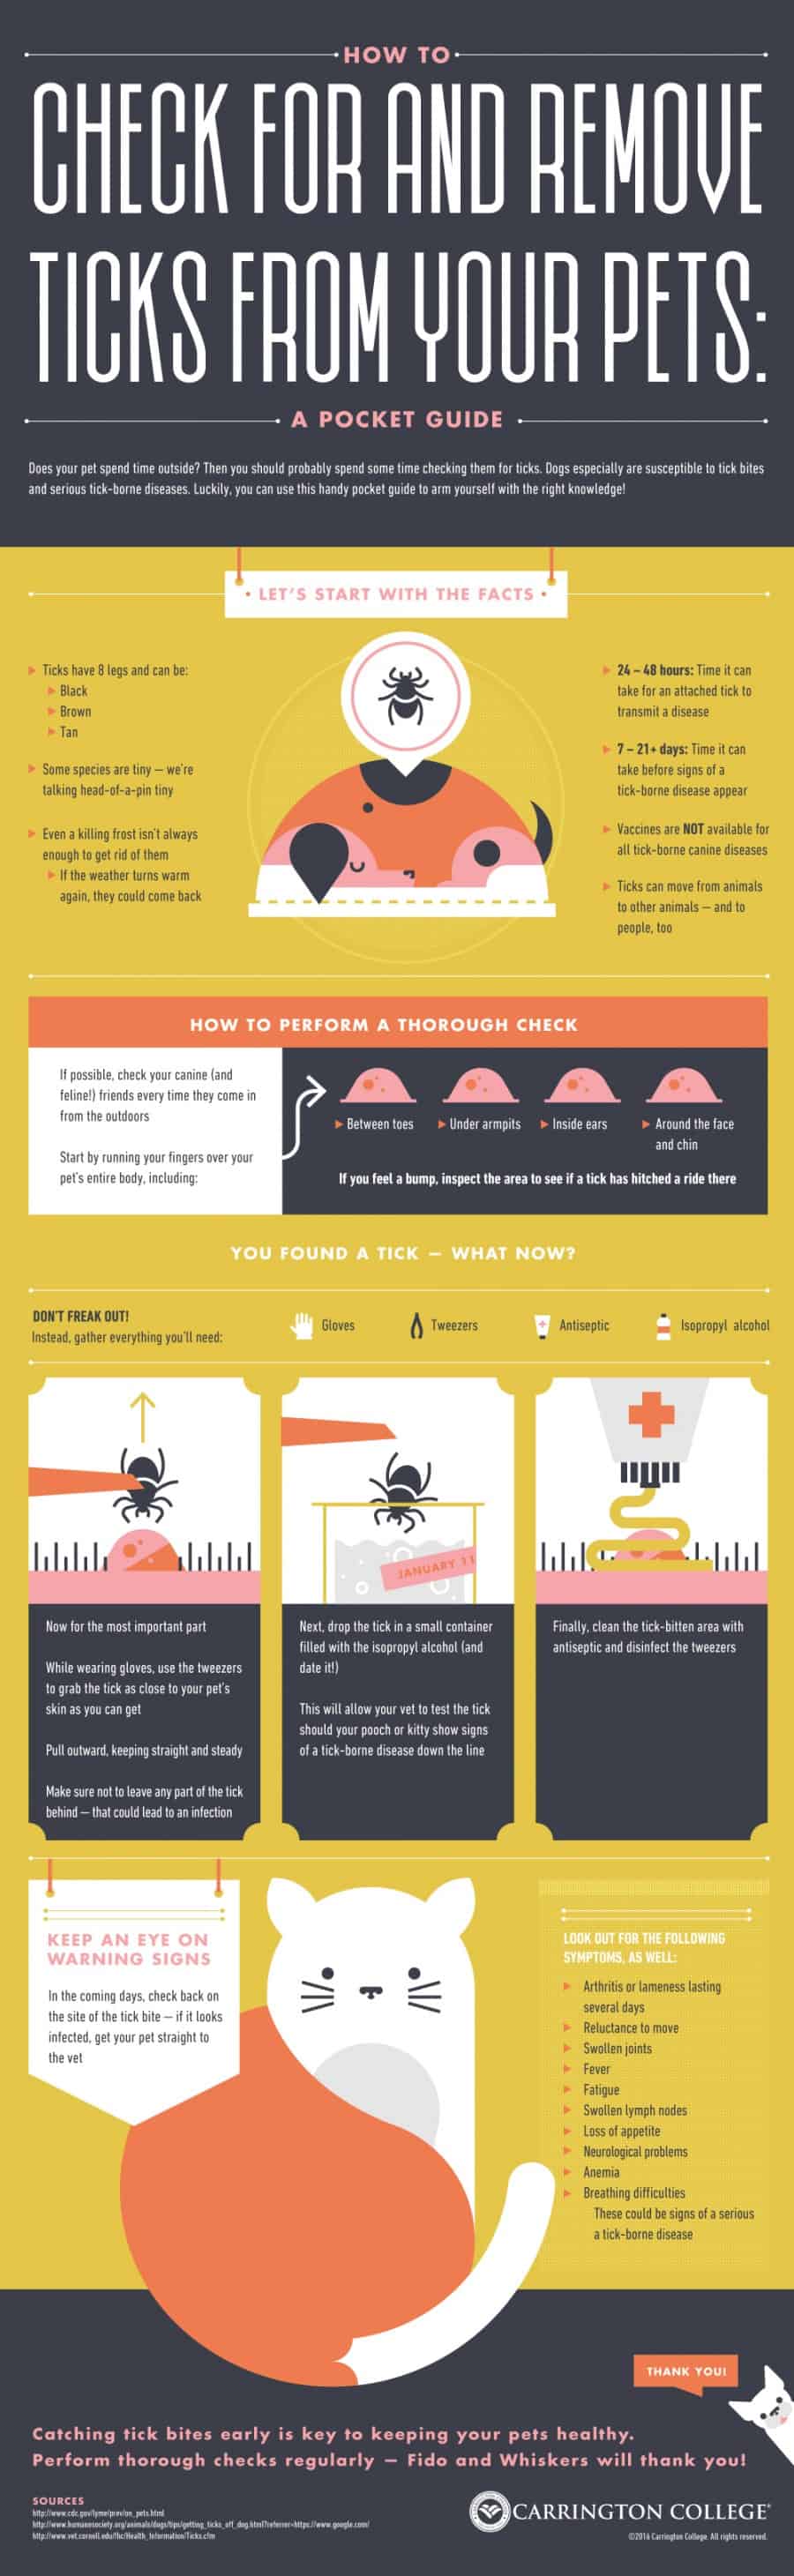 Check-For-and-Remove-Ticks-From-Your-Pets-Infographic